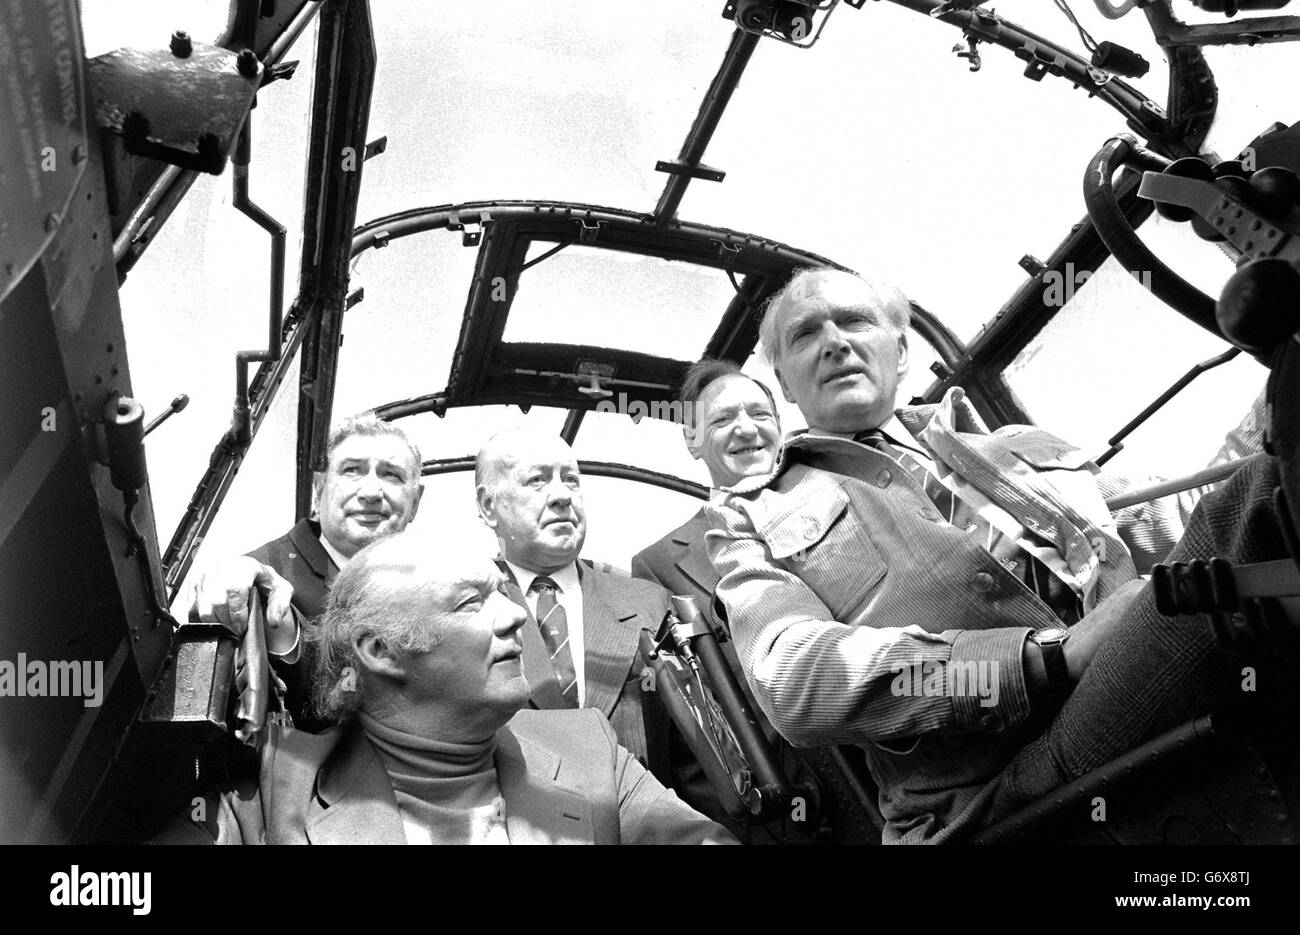 In the cockpit of the last operational Lancaster at RAF Scampton are five survivors (from left) George Chalmers (wireless operator), Ivan Whittaker (engineer), Jack Buckley (gunner), Bill Howarth (gunner) and Bill Townsend (pilot) of the Dambusters raid on the industrial heart of Germany. *02/04/04: A collection of the medals won by Ivan Whittaker have gone on display ahead of their auction later this month. During the Second World War he twice received a Distinguished Flying Cross (DFC) - the only flight engineer in the RAF to receive two such honours. Stock Photo